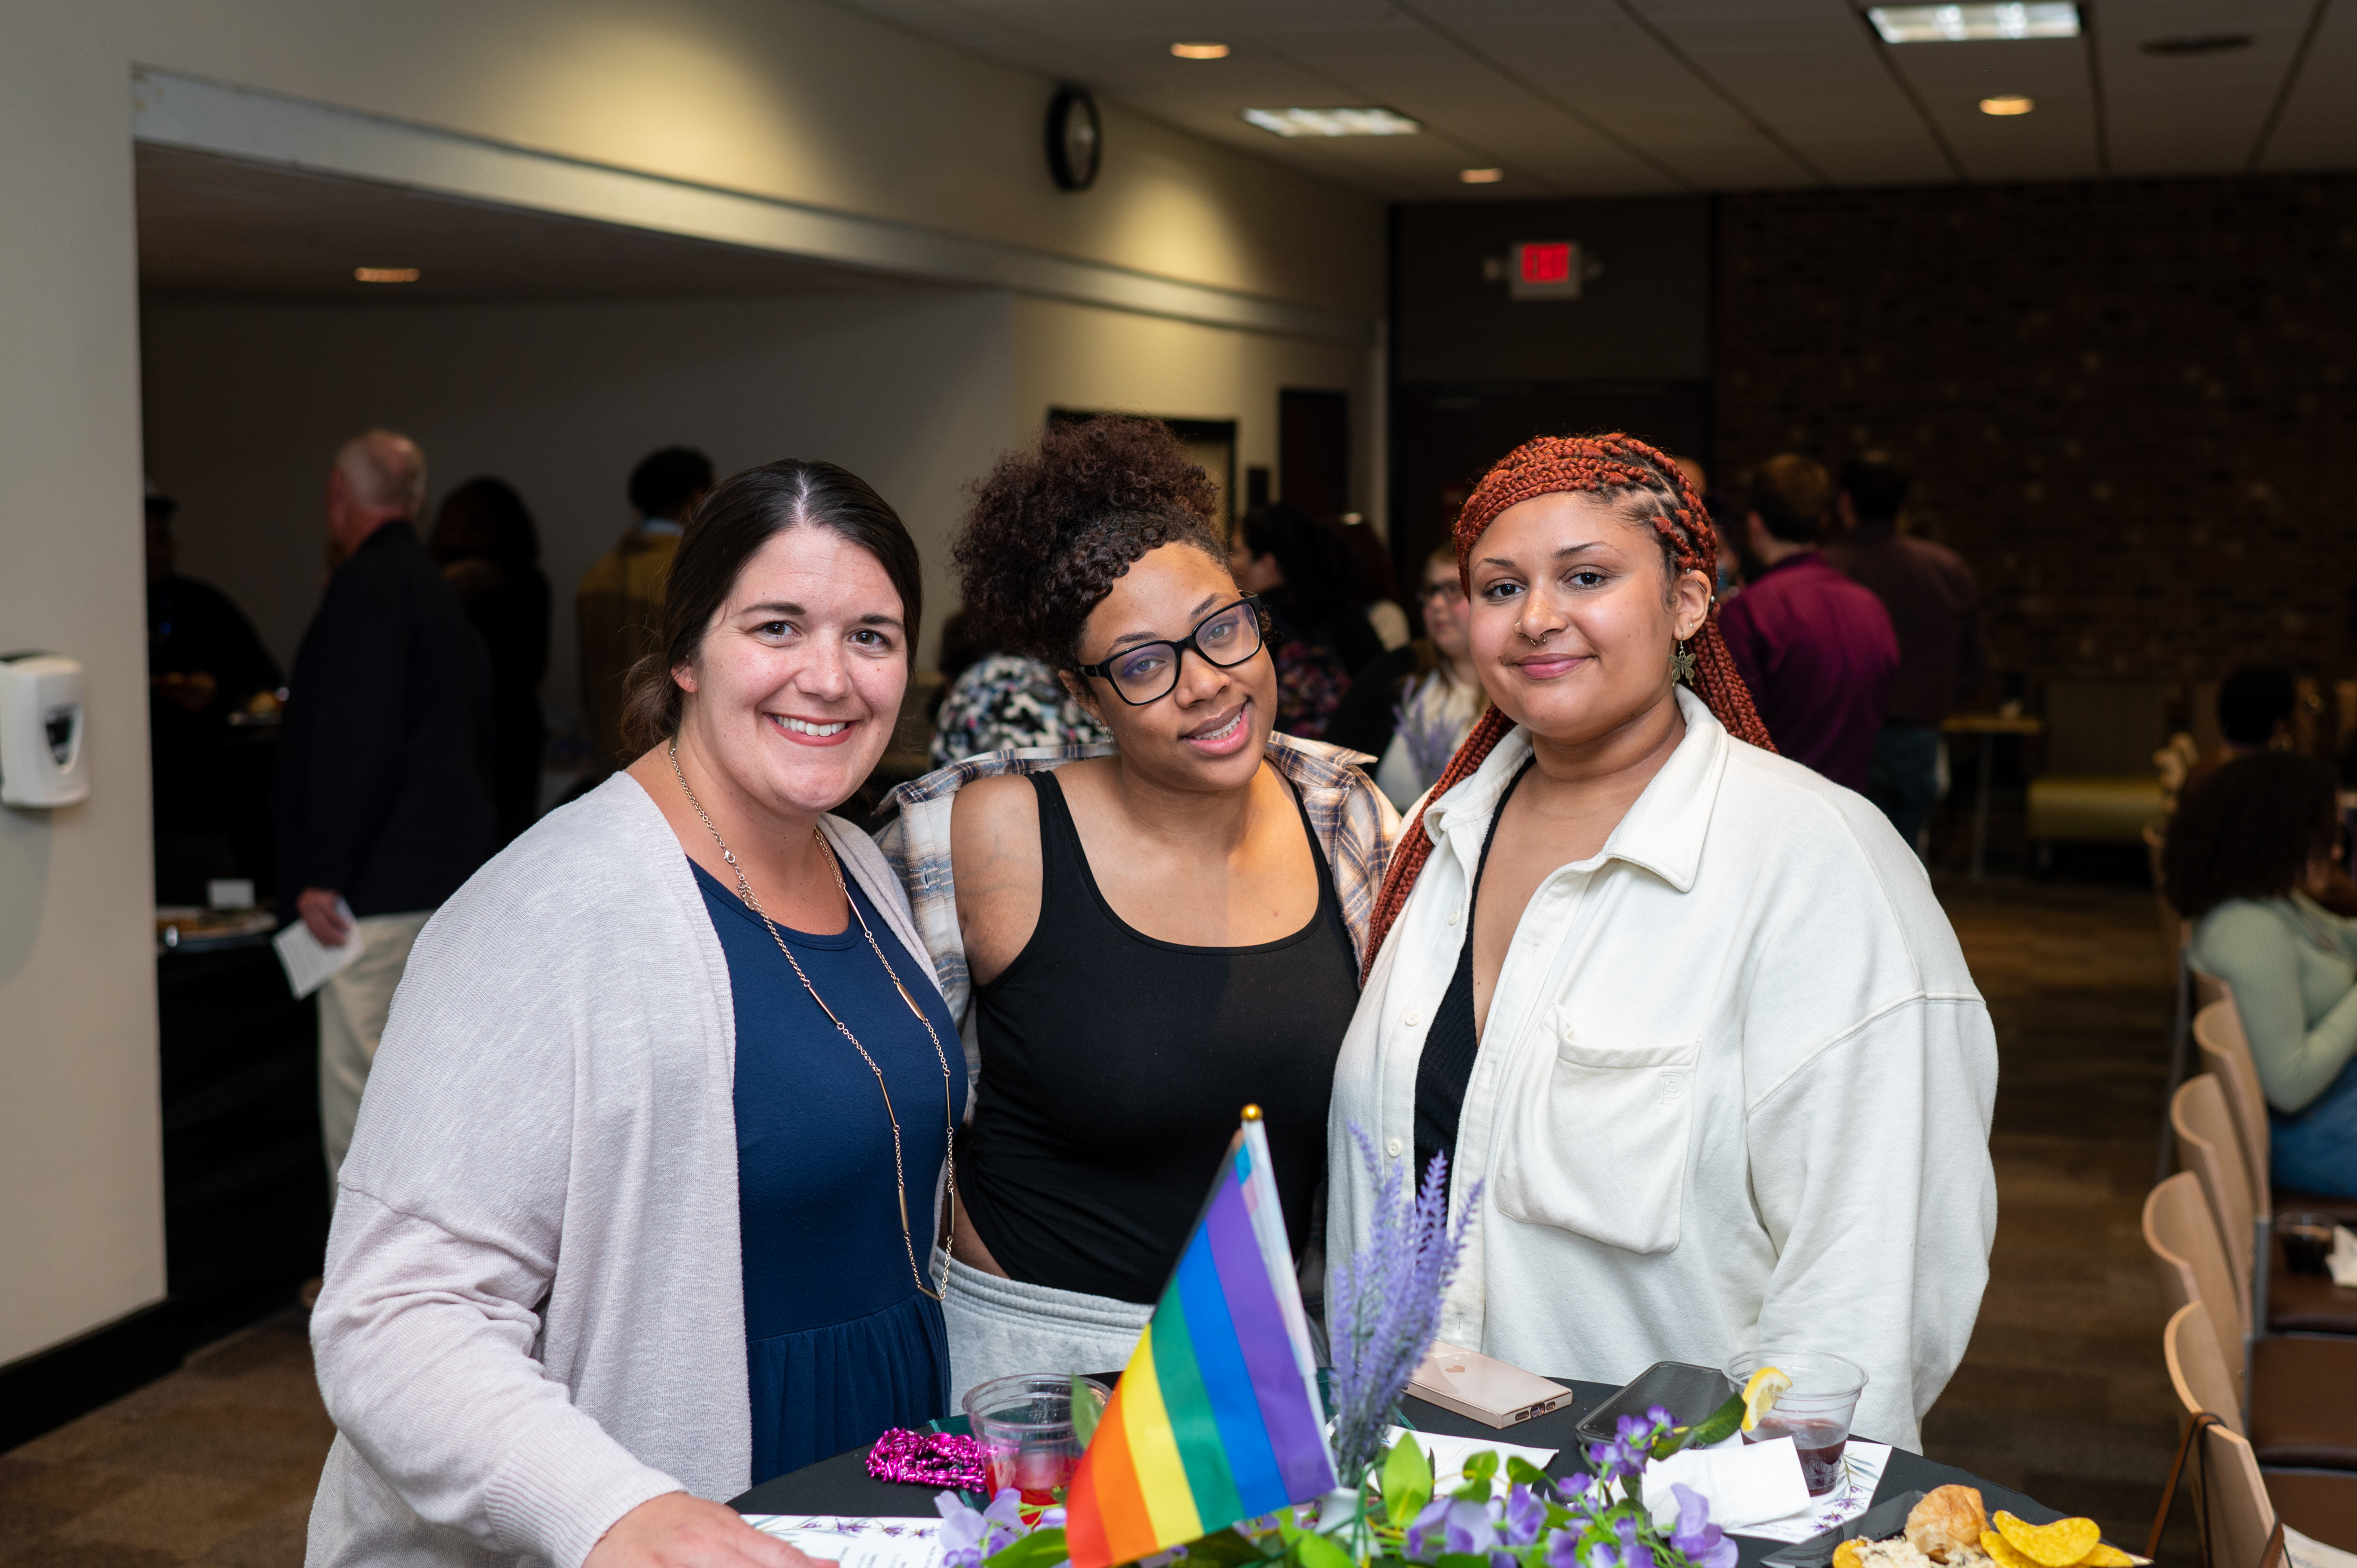 Three guests standing in front of a bistro table decorated with lavender and a pride flag